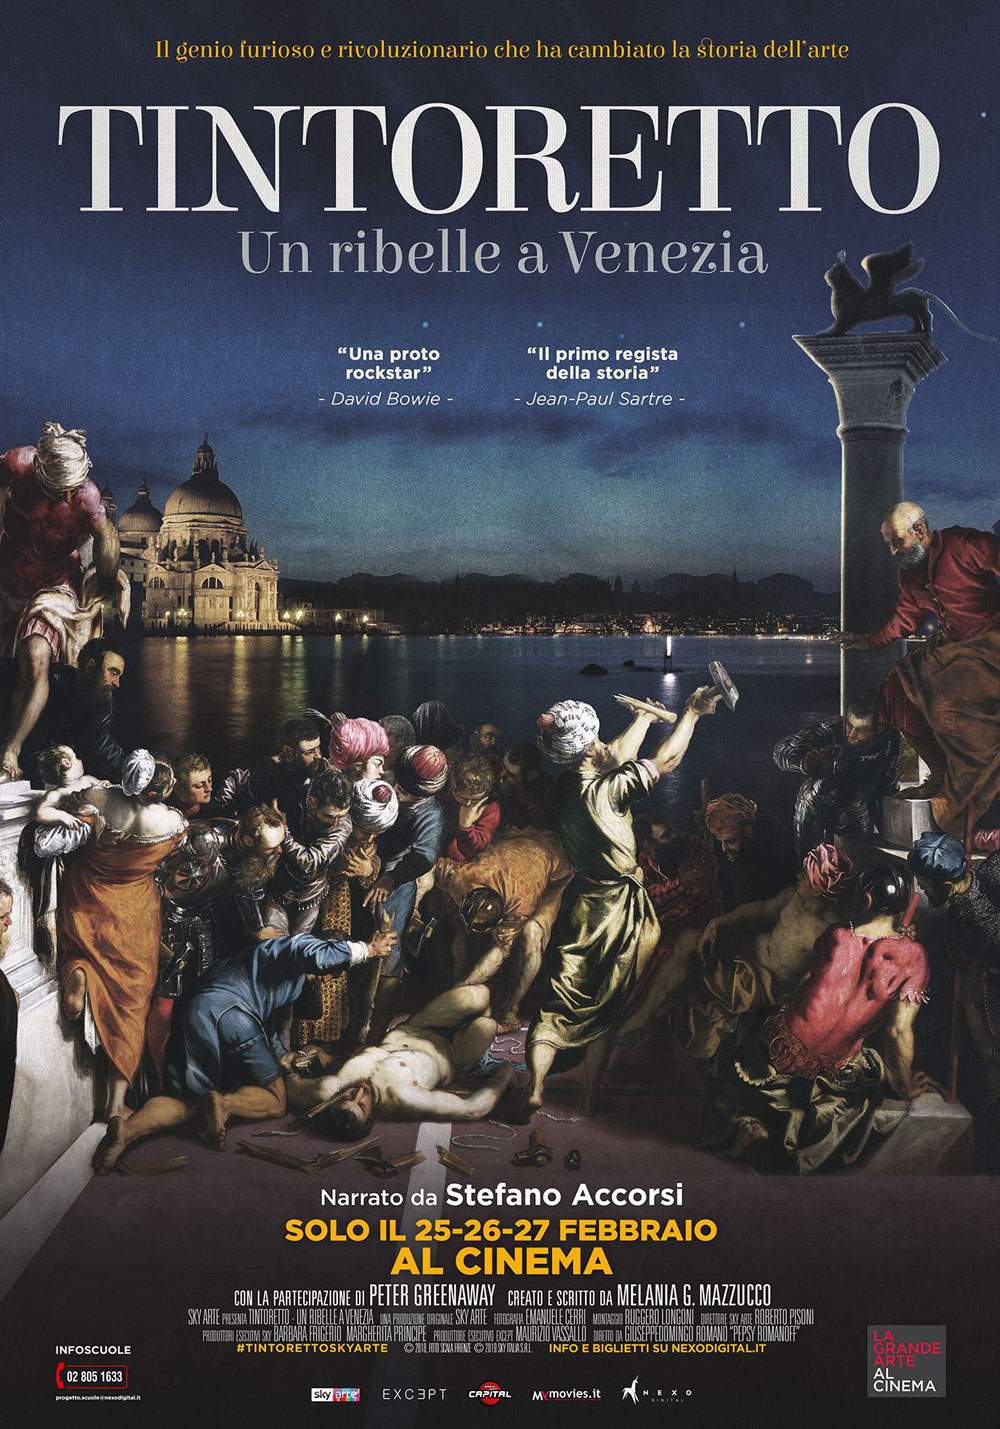 Preview: the docu-film dedicated to Tintoretto in Italian cinemas in February